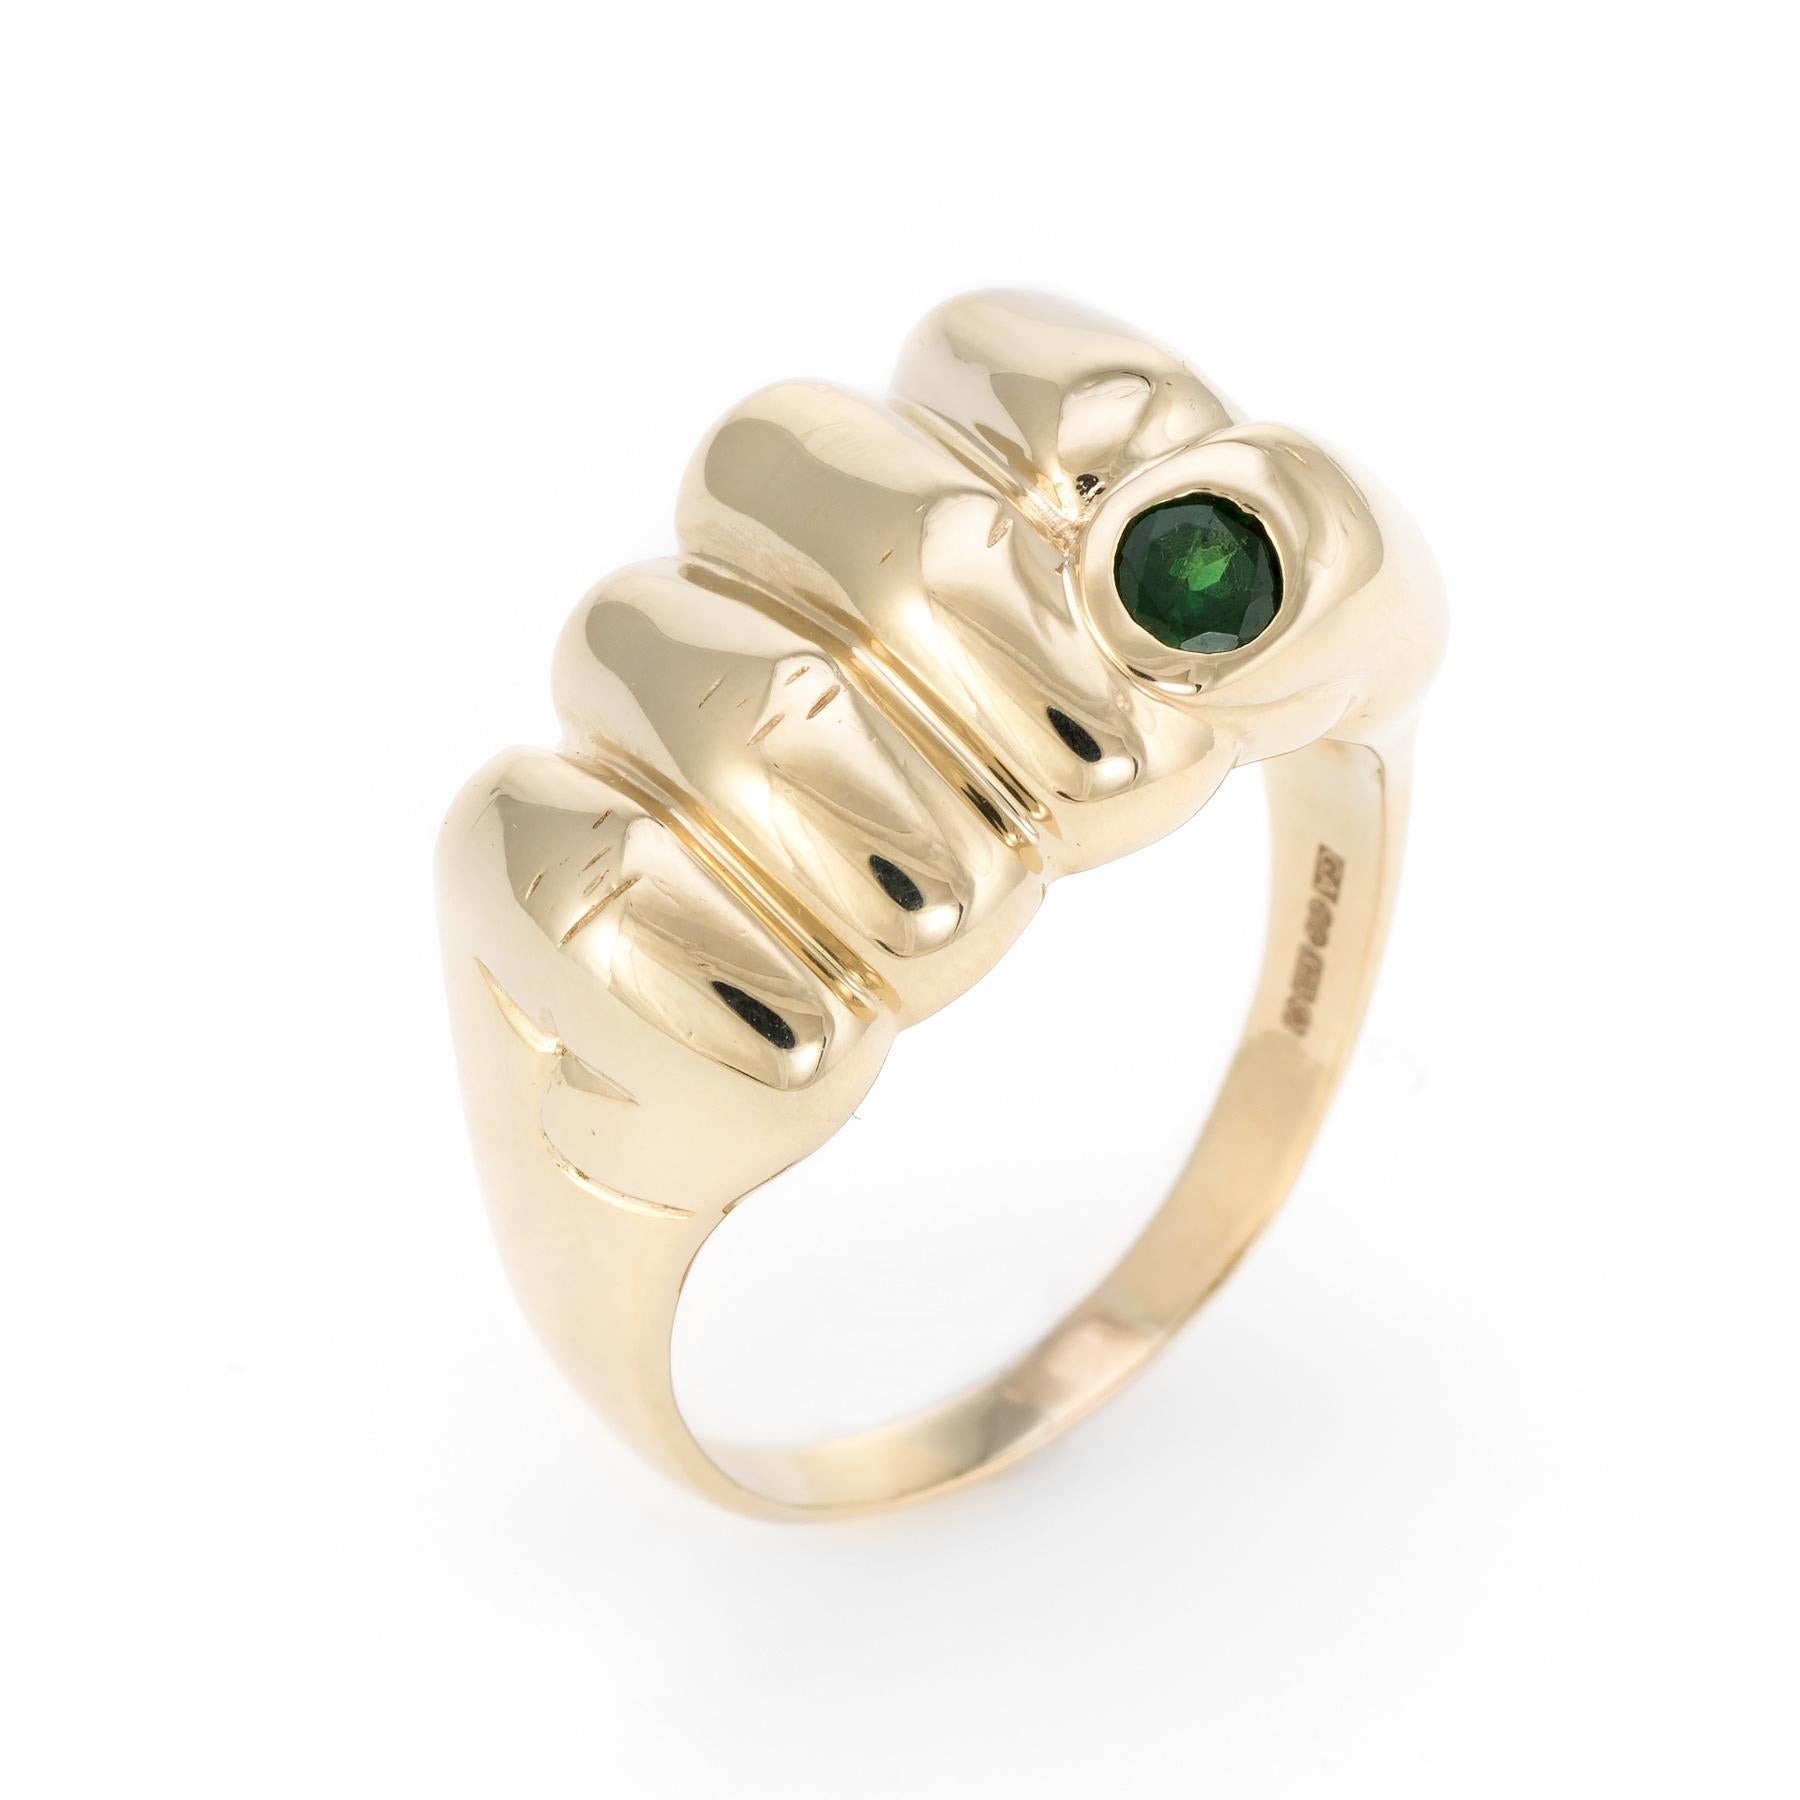 Distinct and unique vintage fist pump ring, crafted in 9 karat yellow gold. 

One estimated 0.20 carat green tourmaline is set into the band. The tourmaline is in excellent condition and free of cracks or chips.

The ring is in excellent condition